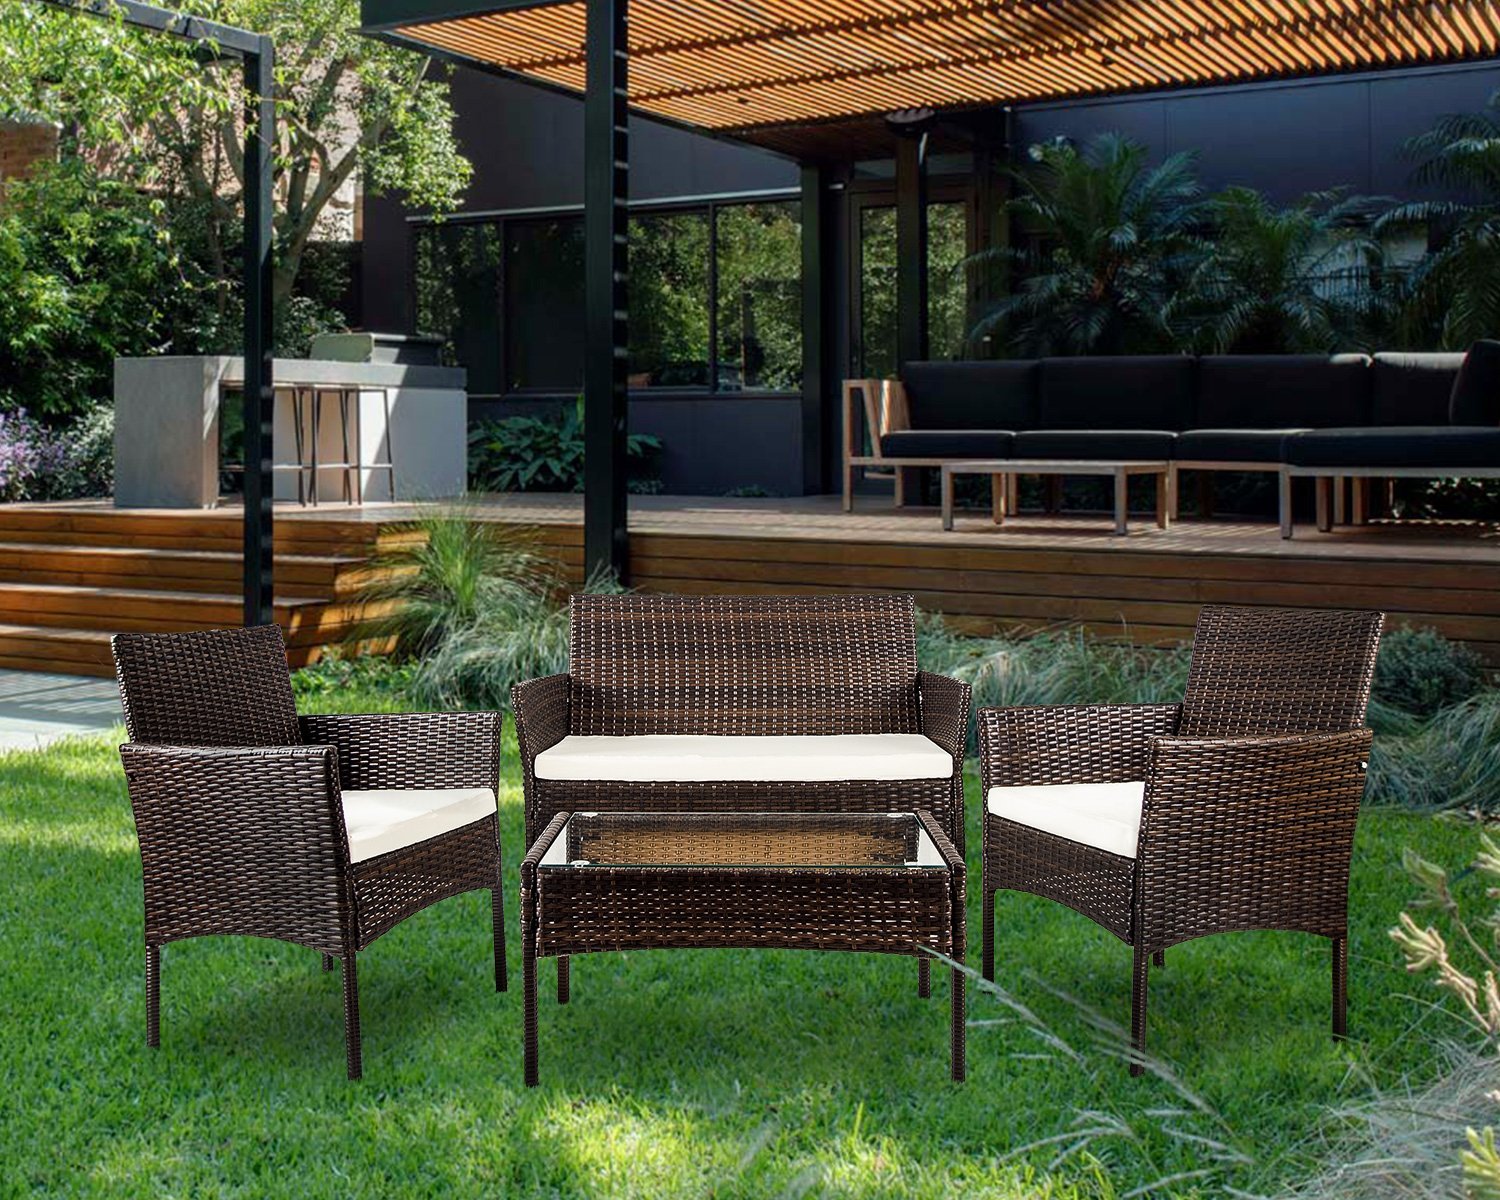 4-piece Merax outdoor cushioned furniture set for $156